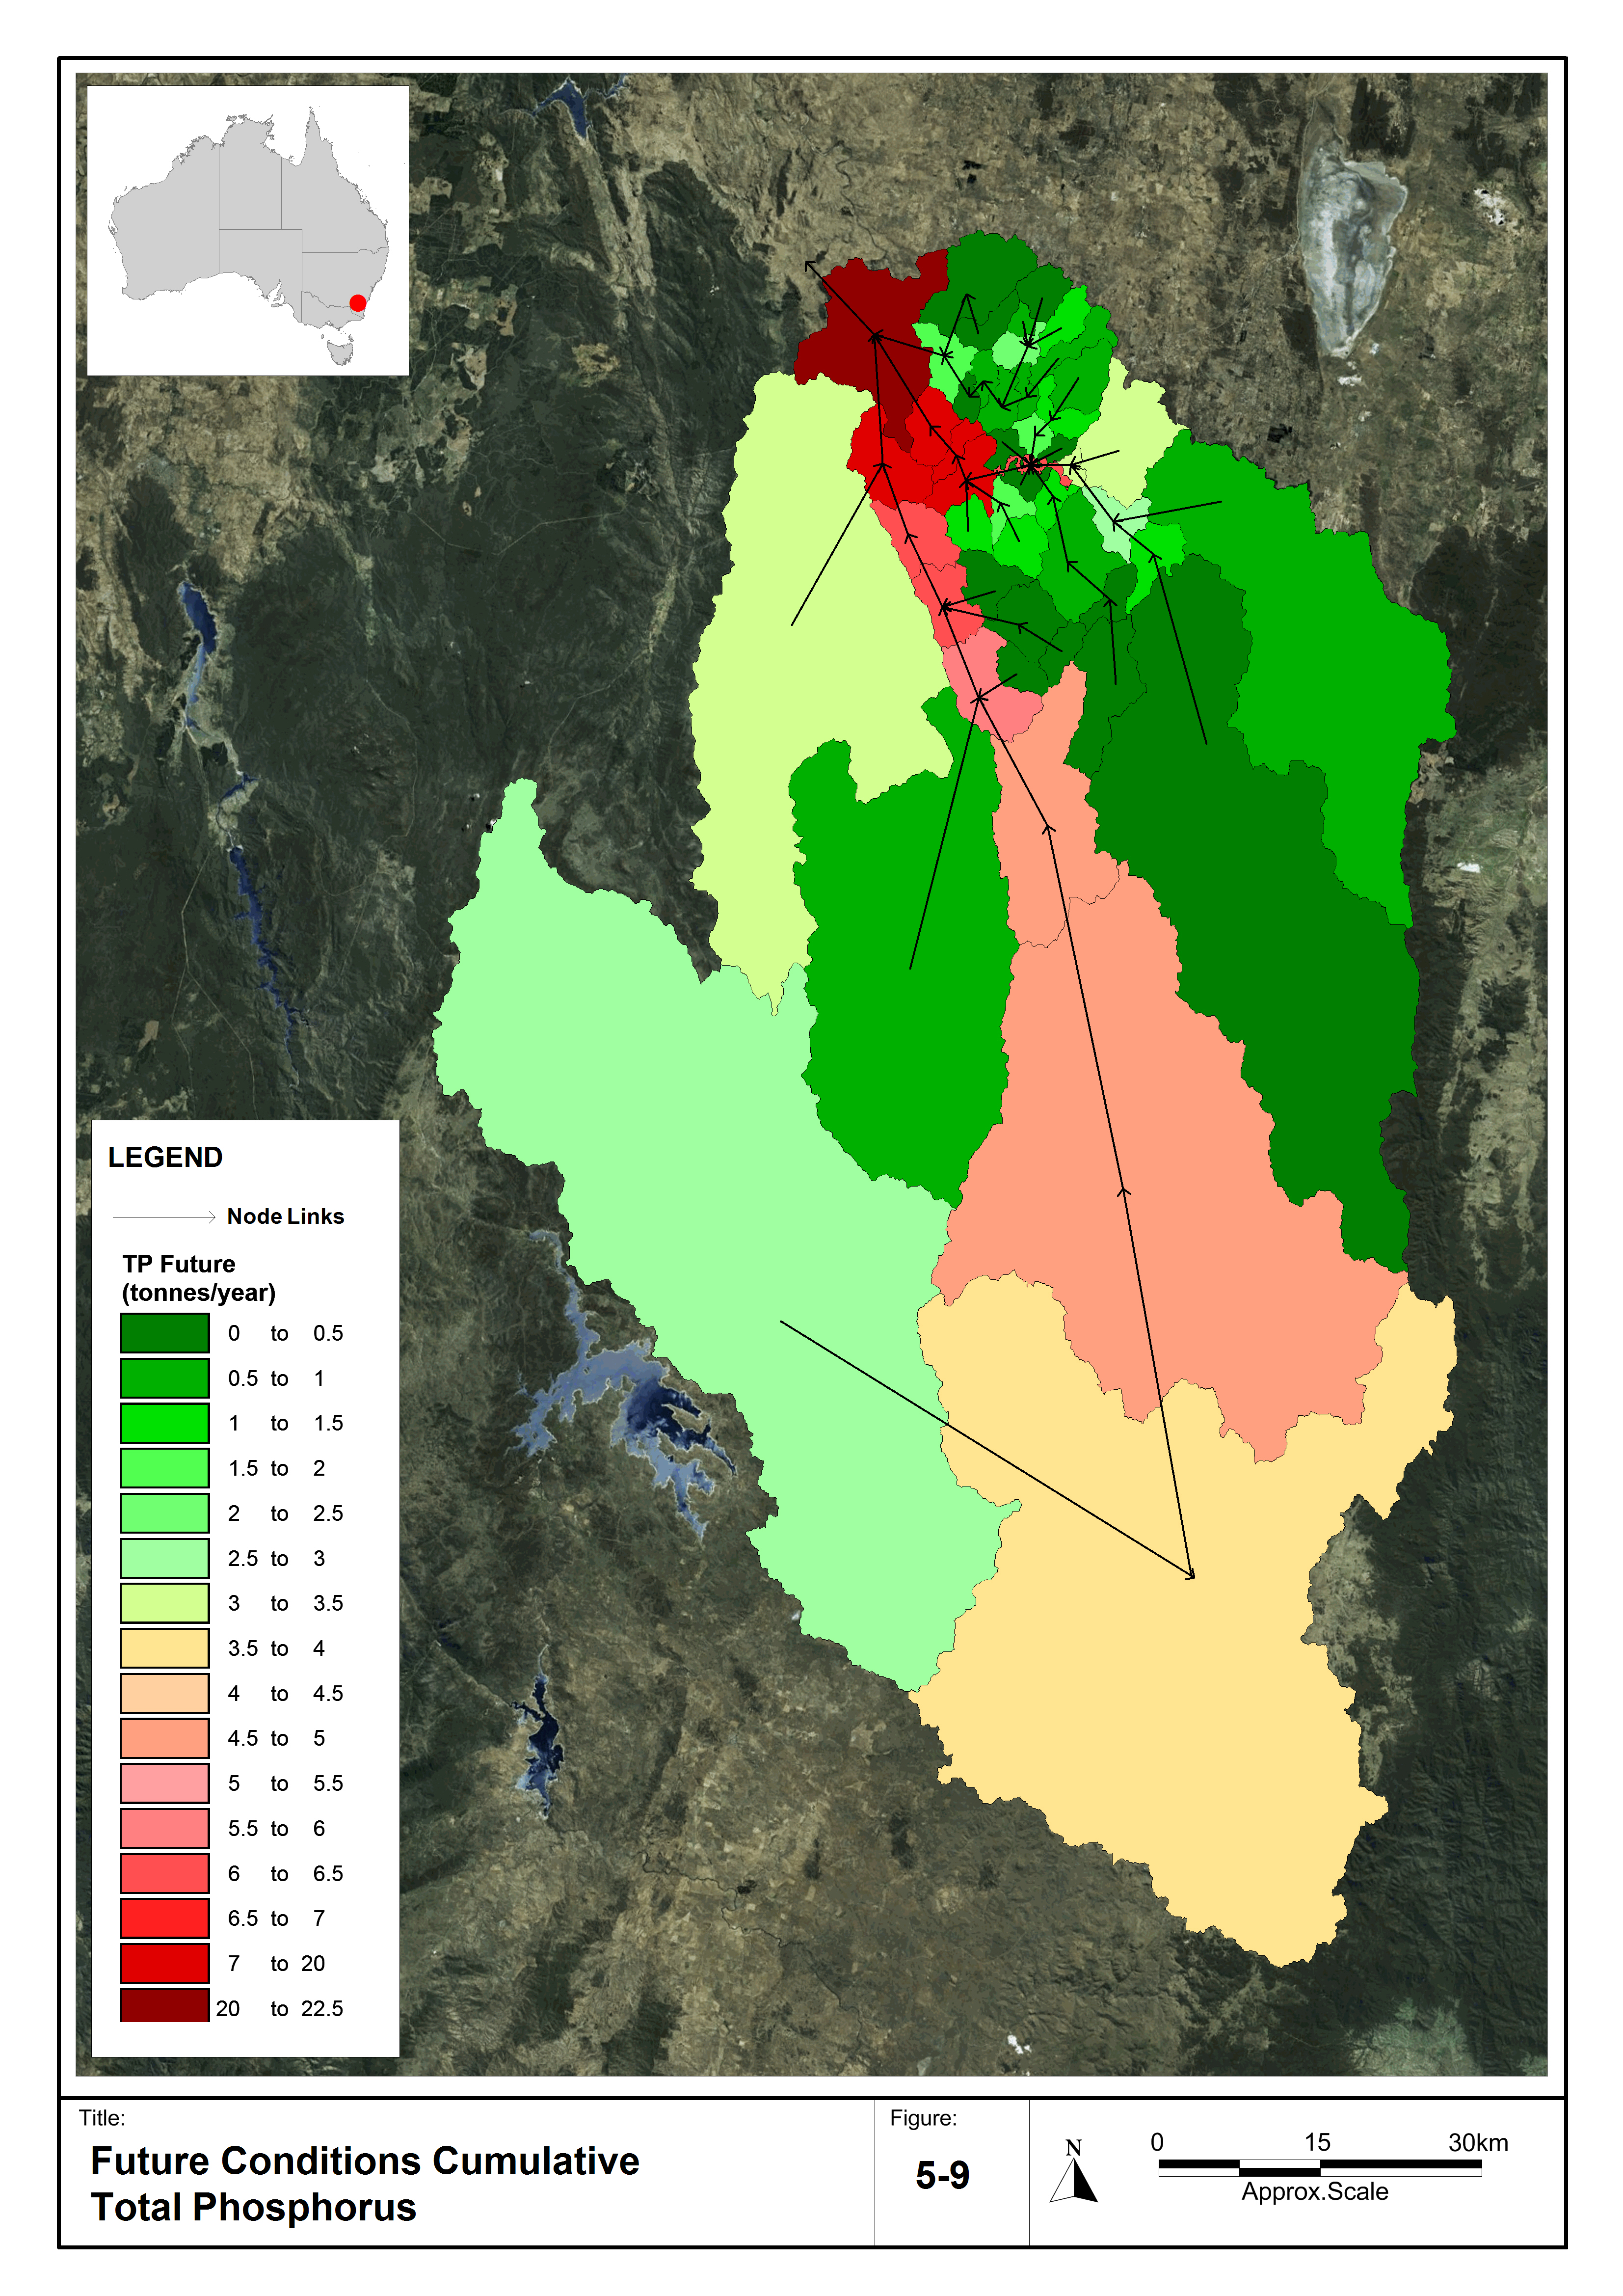 Systems Analysis of Integrated Catchment Management in the ACT region